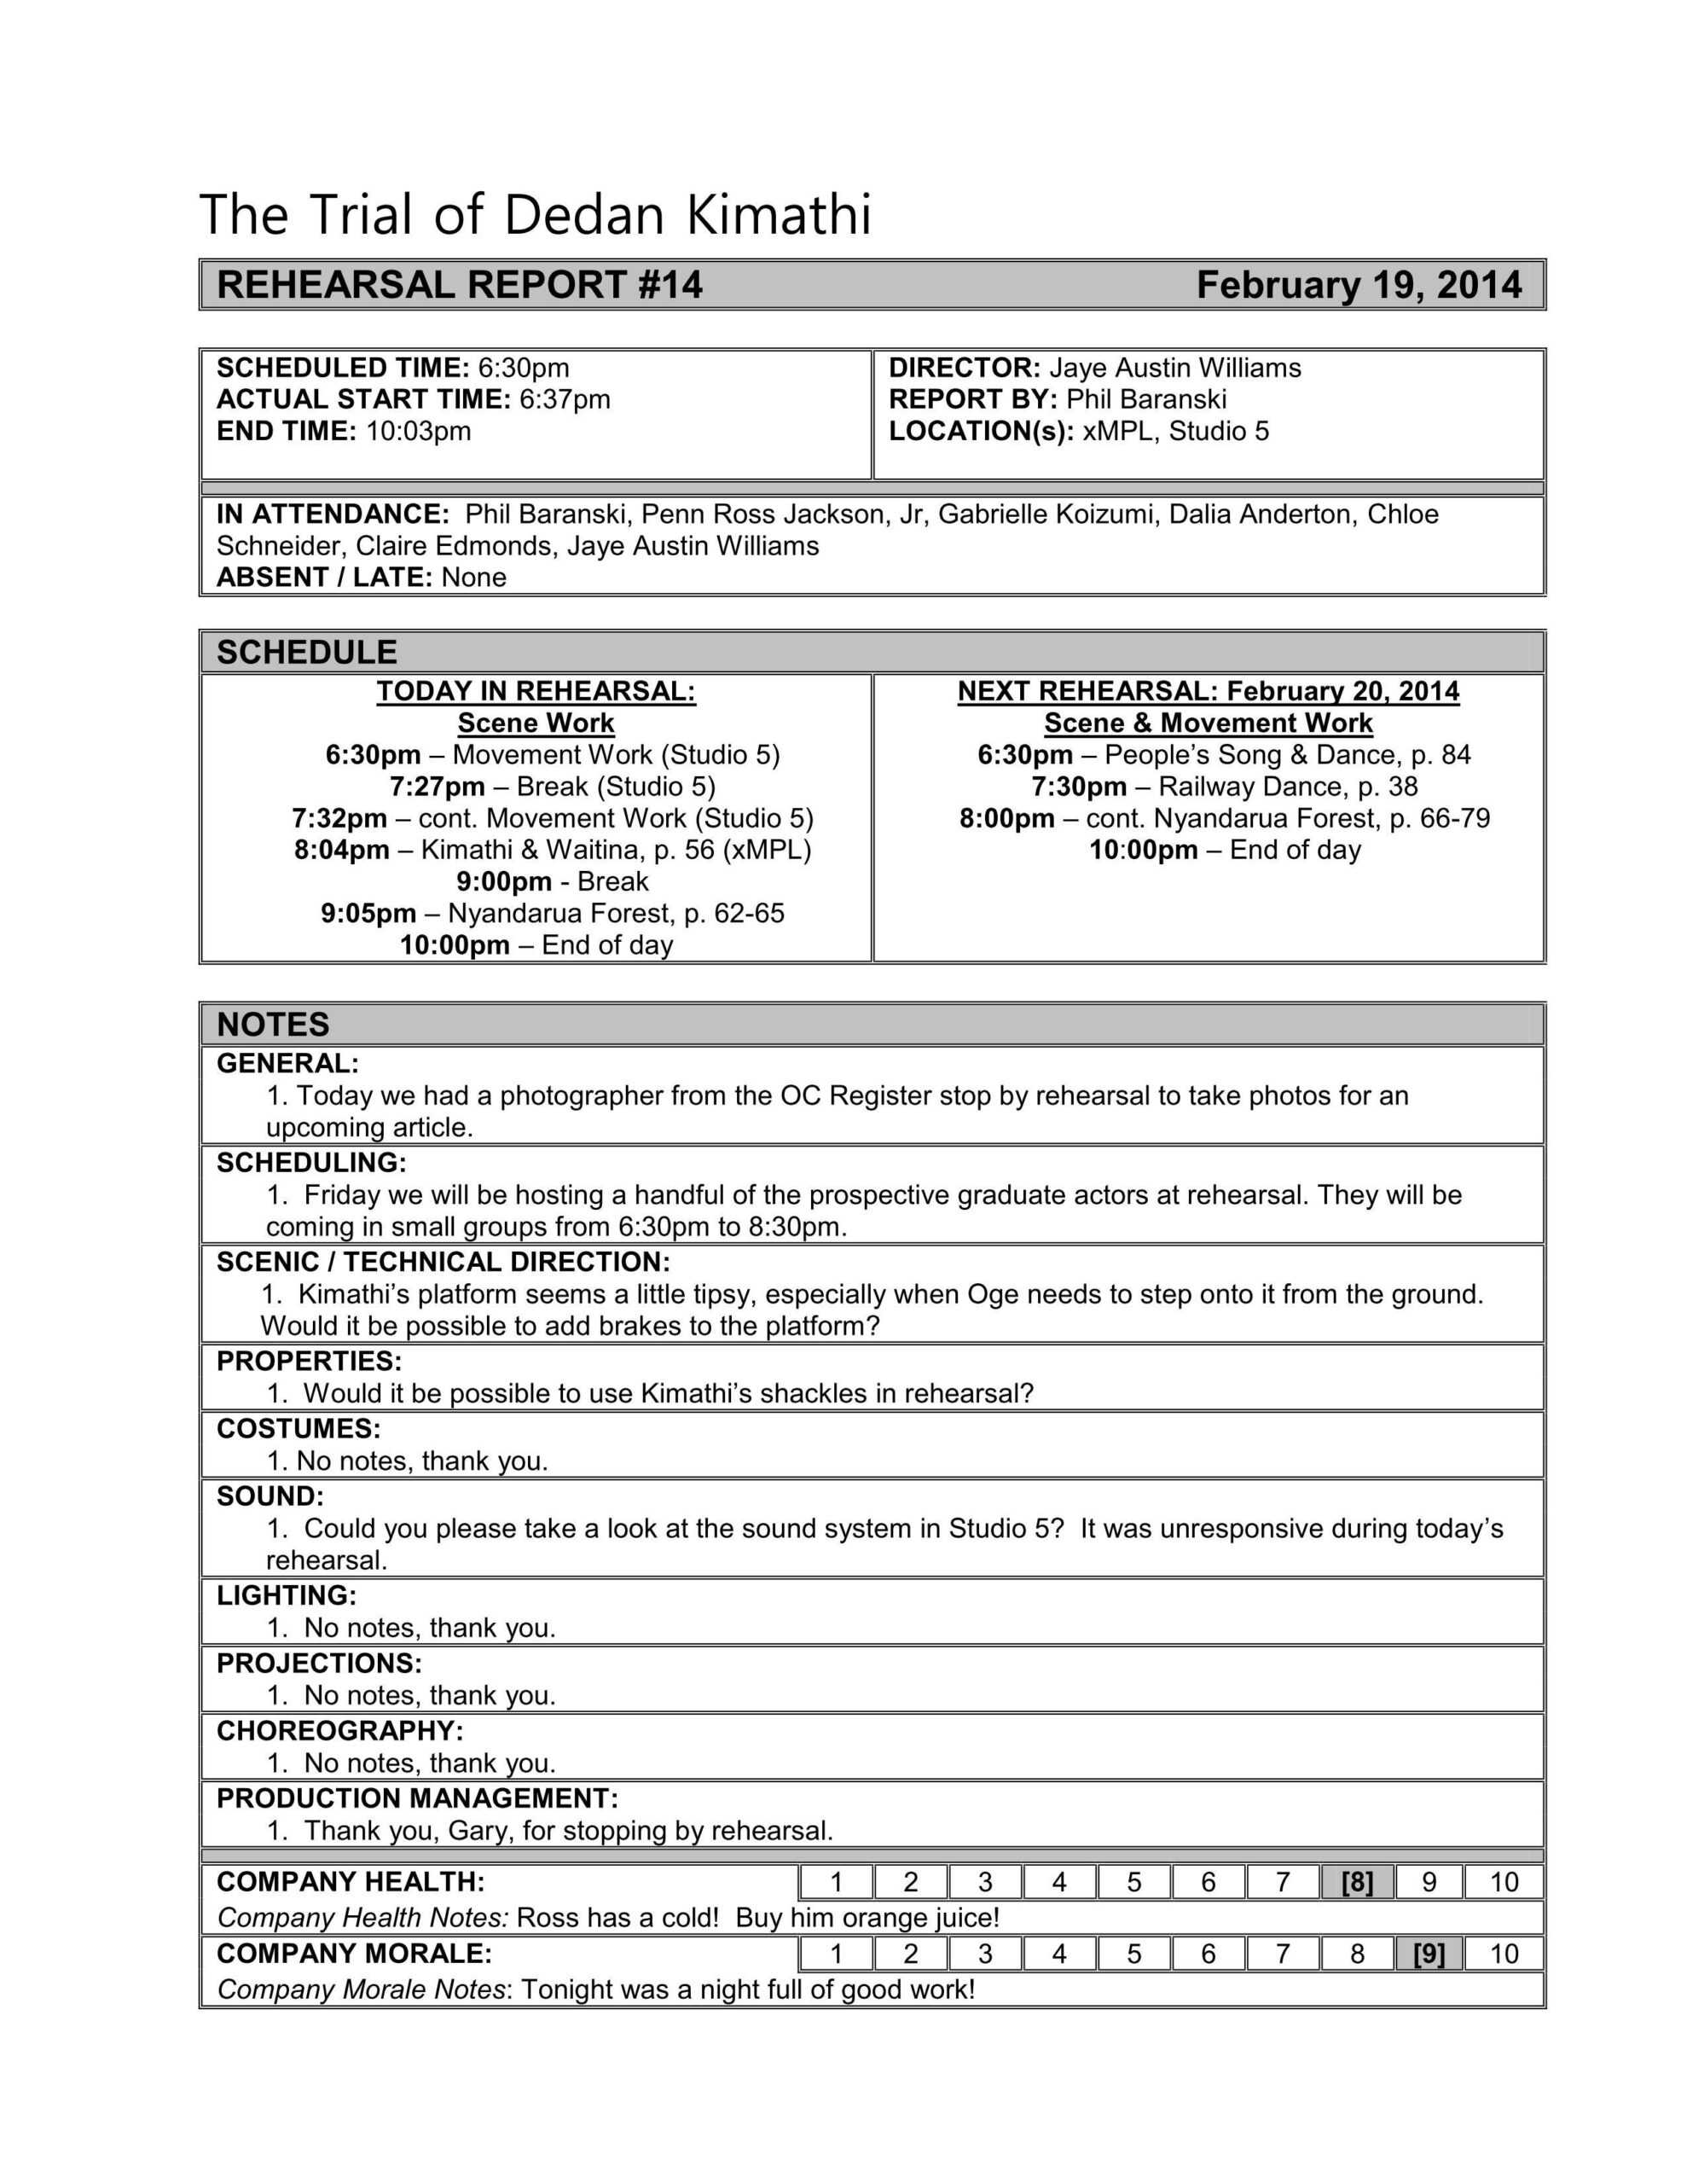 Image Result For Stage Manager Rehearsal Report | Drama In Rehearsal Report Template